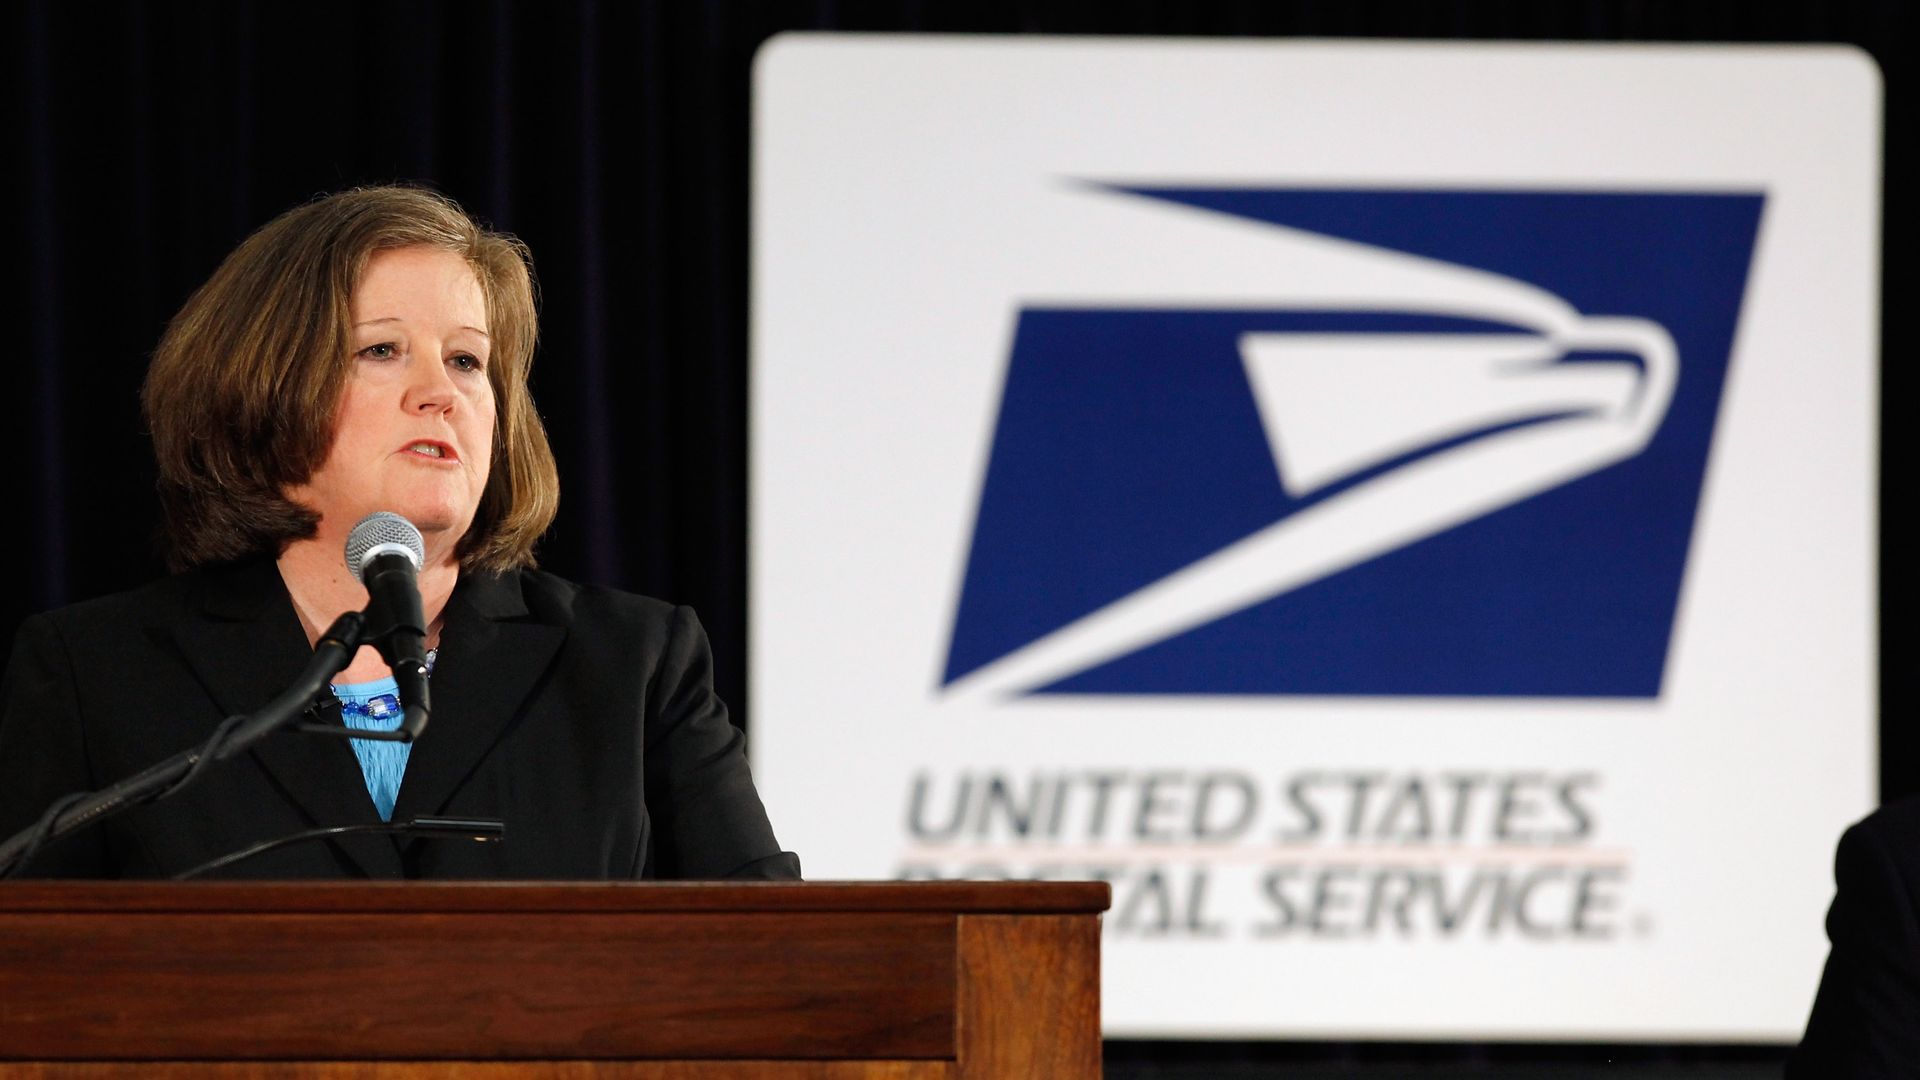 In this image, Brennan speaks from behind a podium while the U.S. Postal Service logo stands behind her.